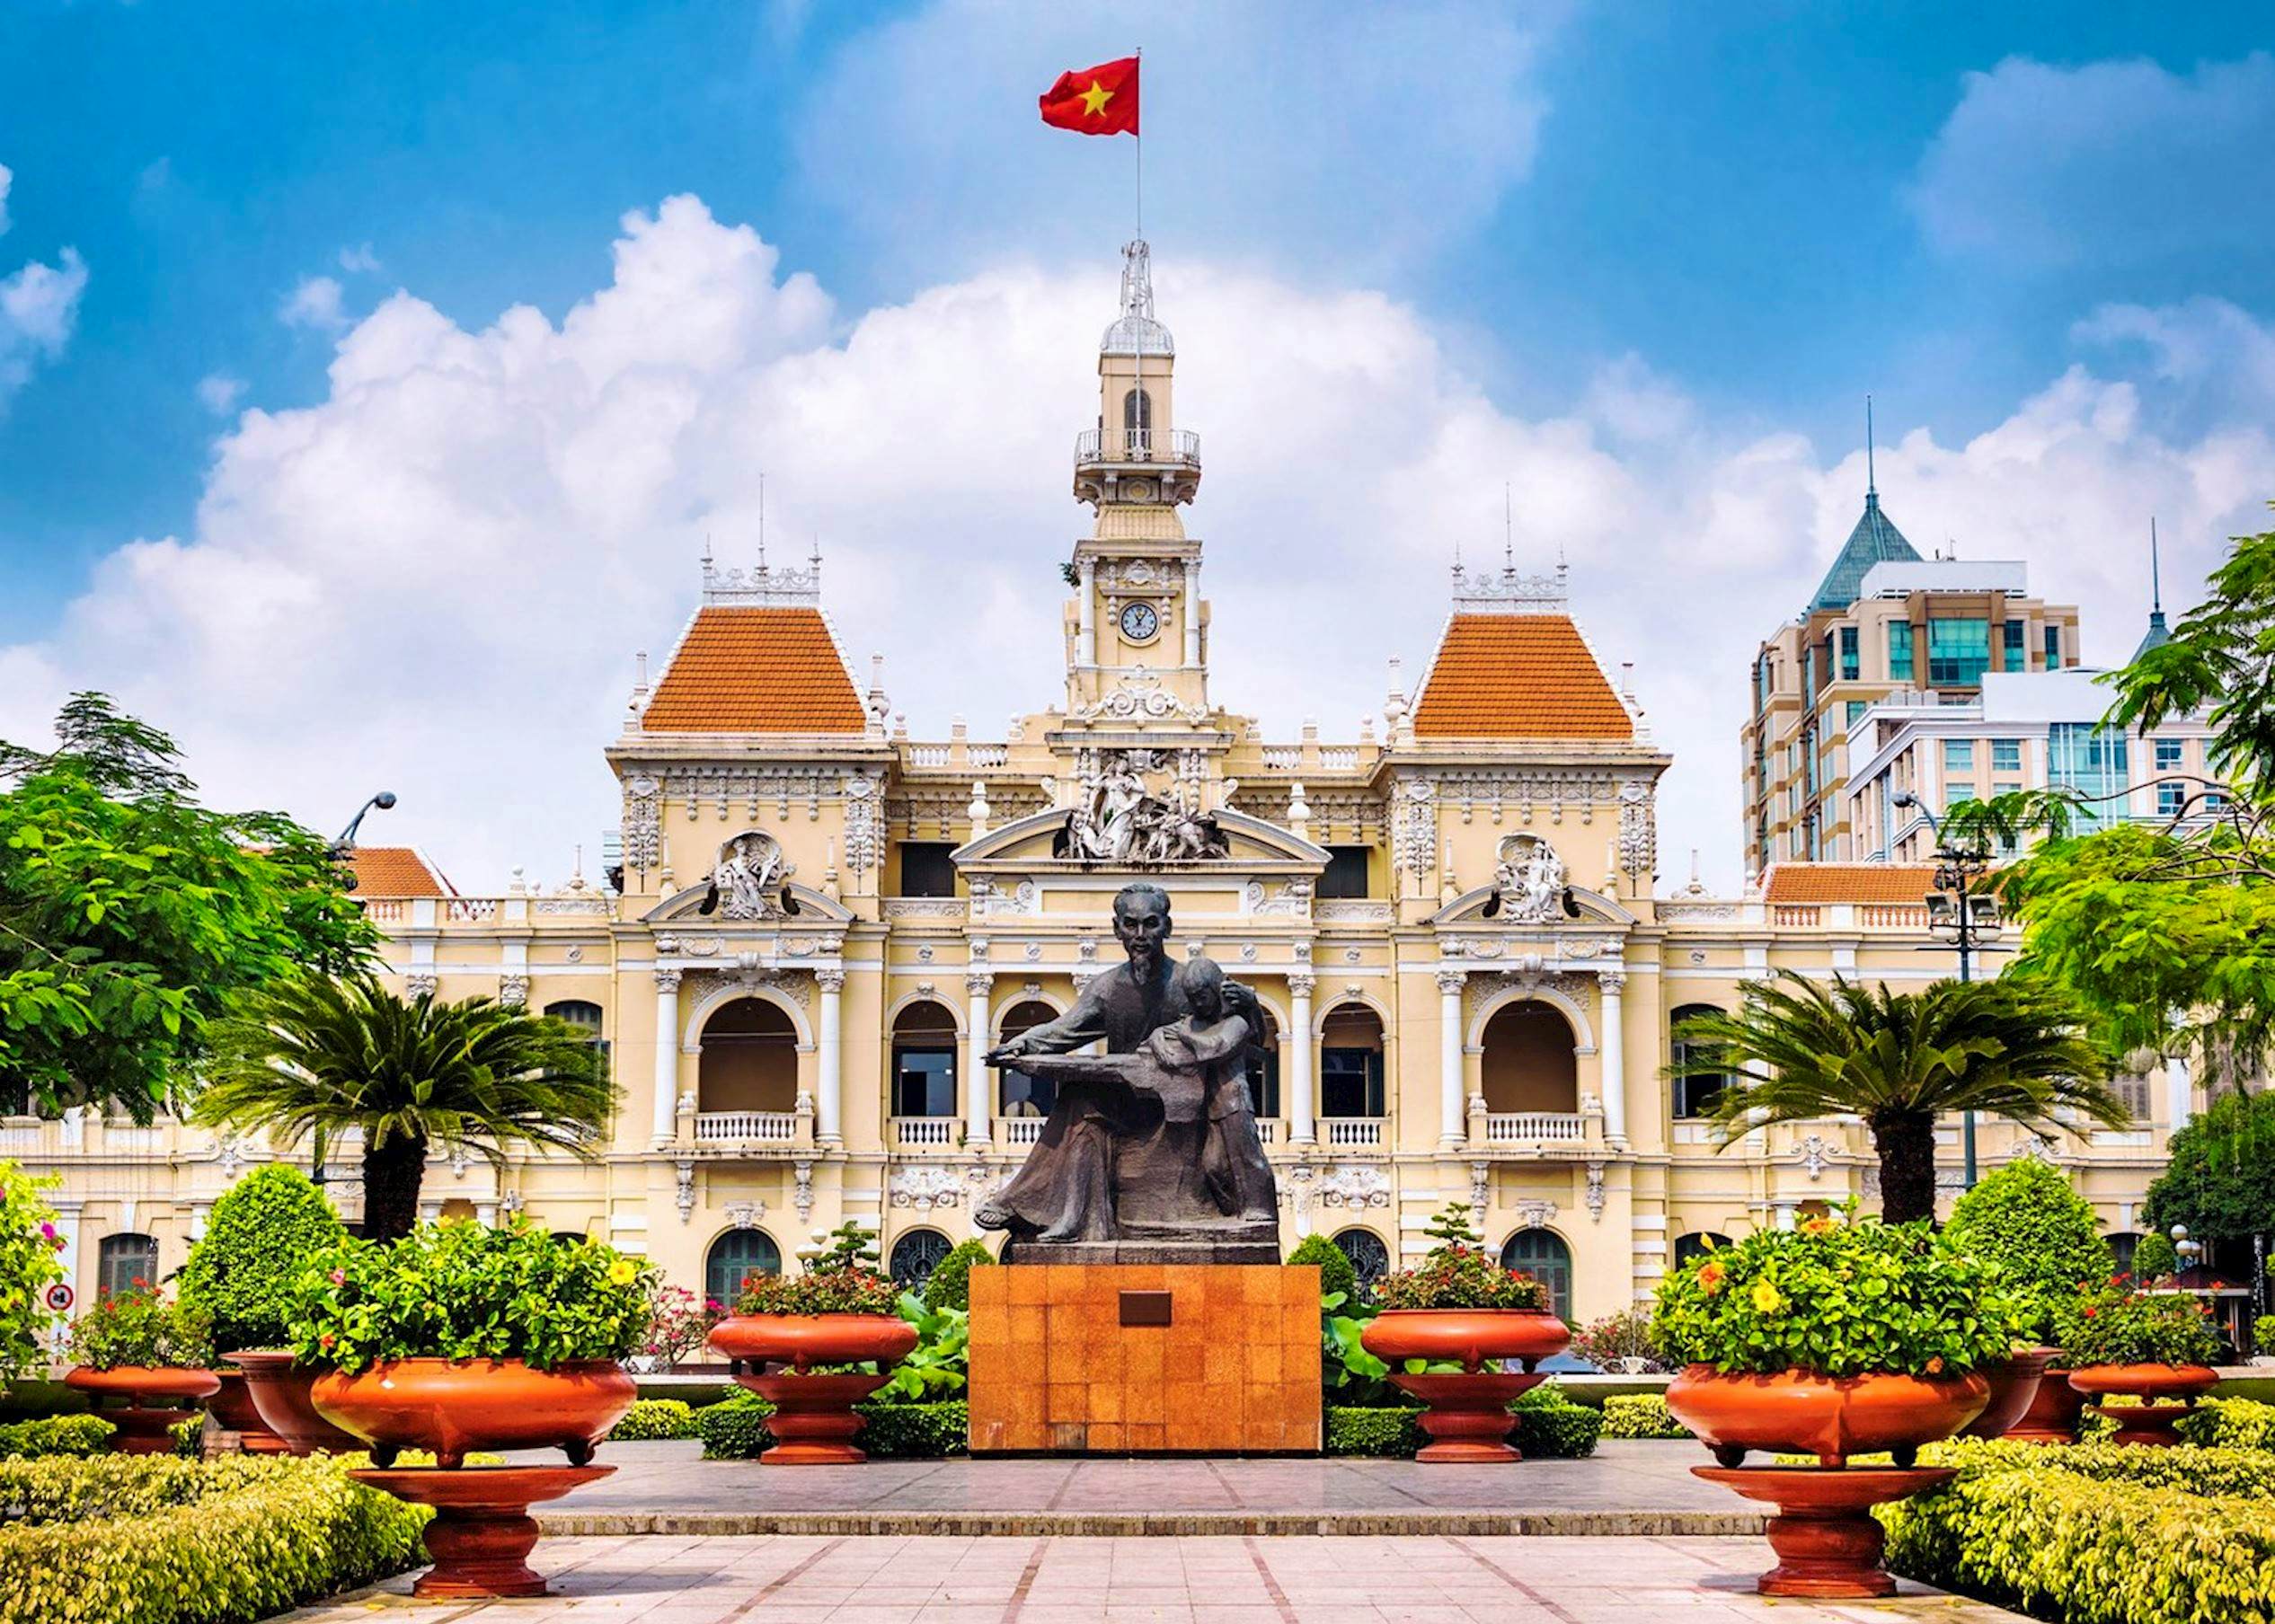 Hanoi Half Day City Tour and Water Puppet Show With Private Transfers